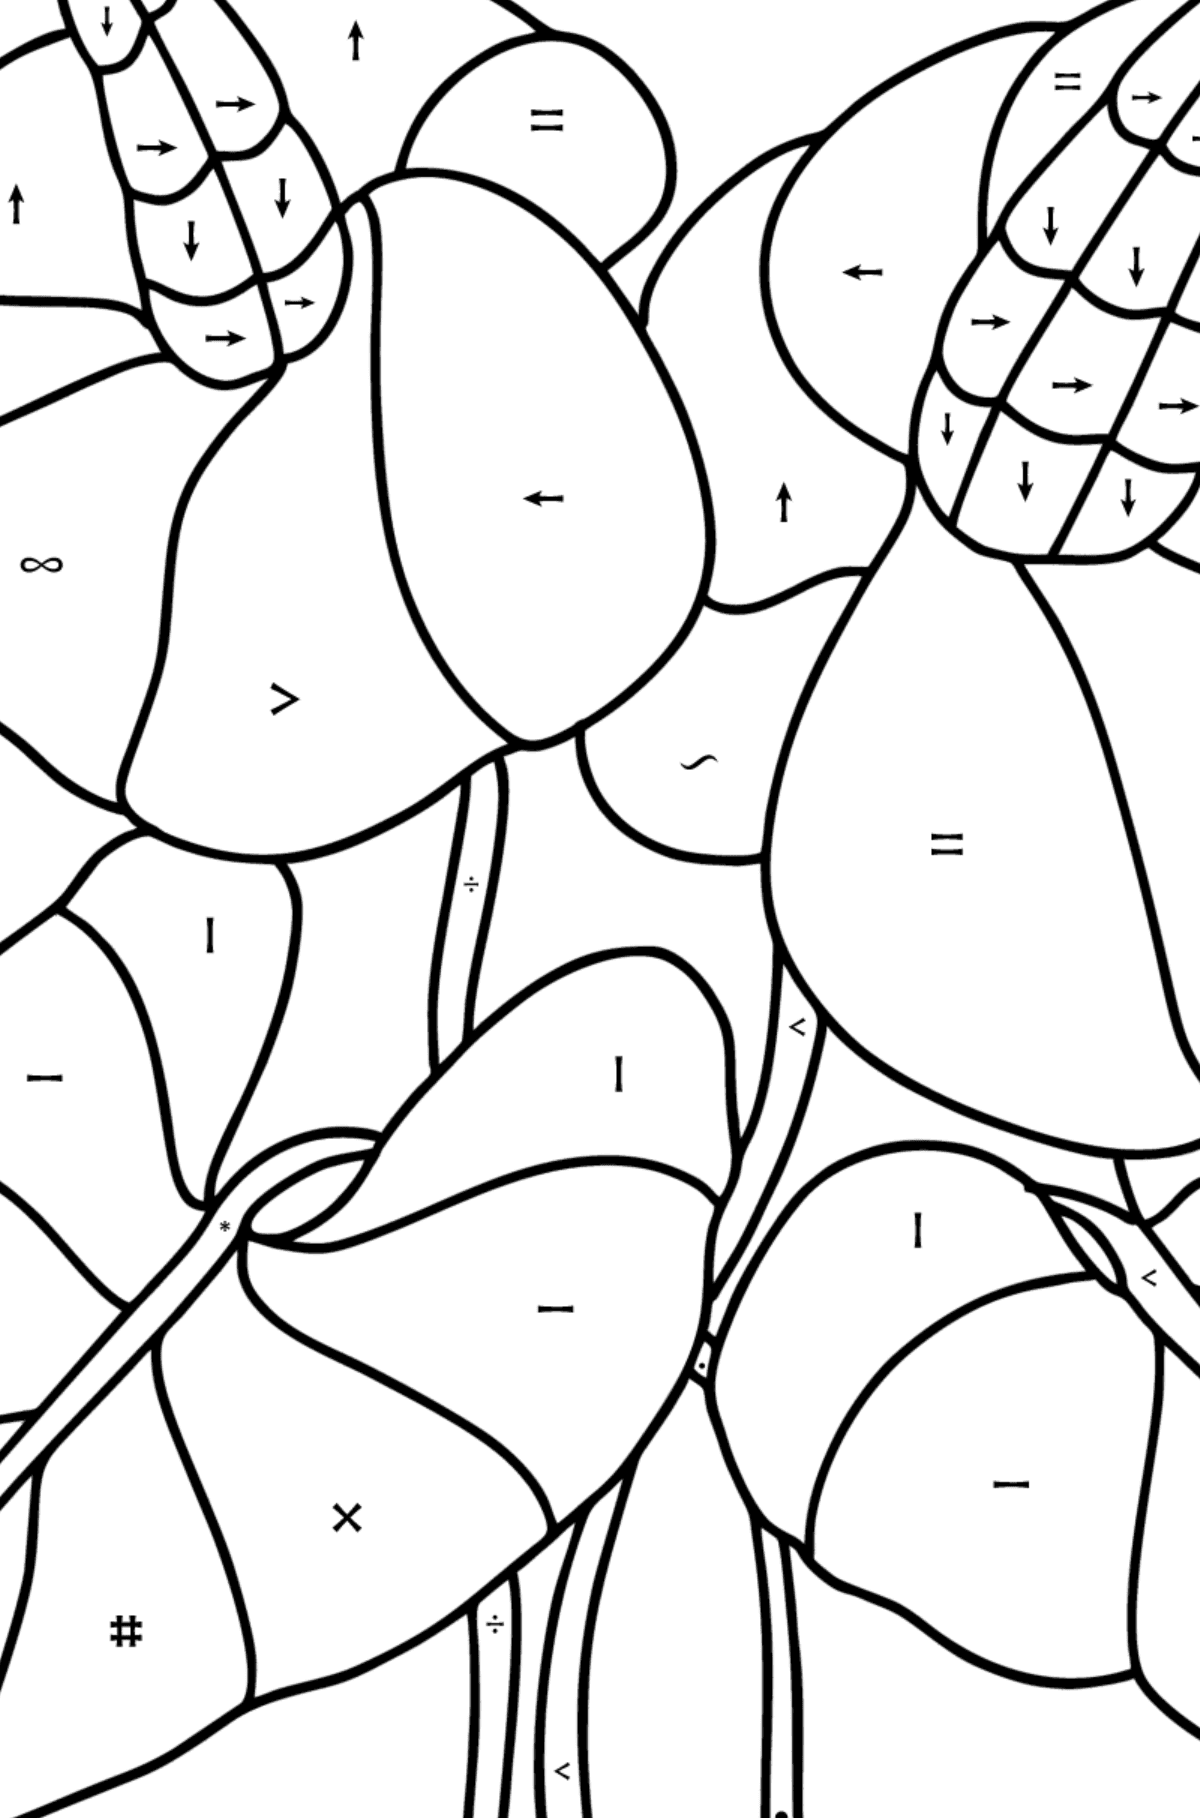 Anthurium coloring page - Coloring by Symbols for Kids